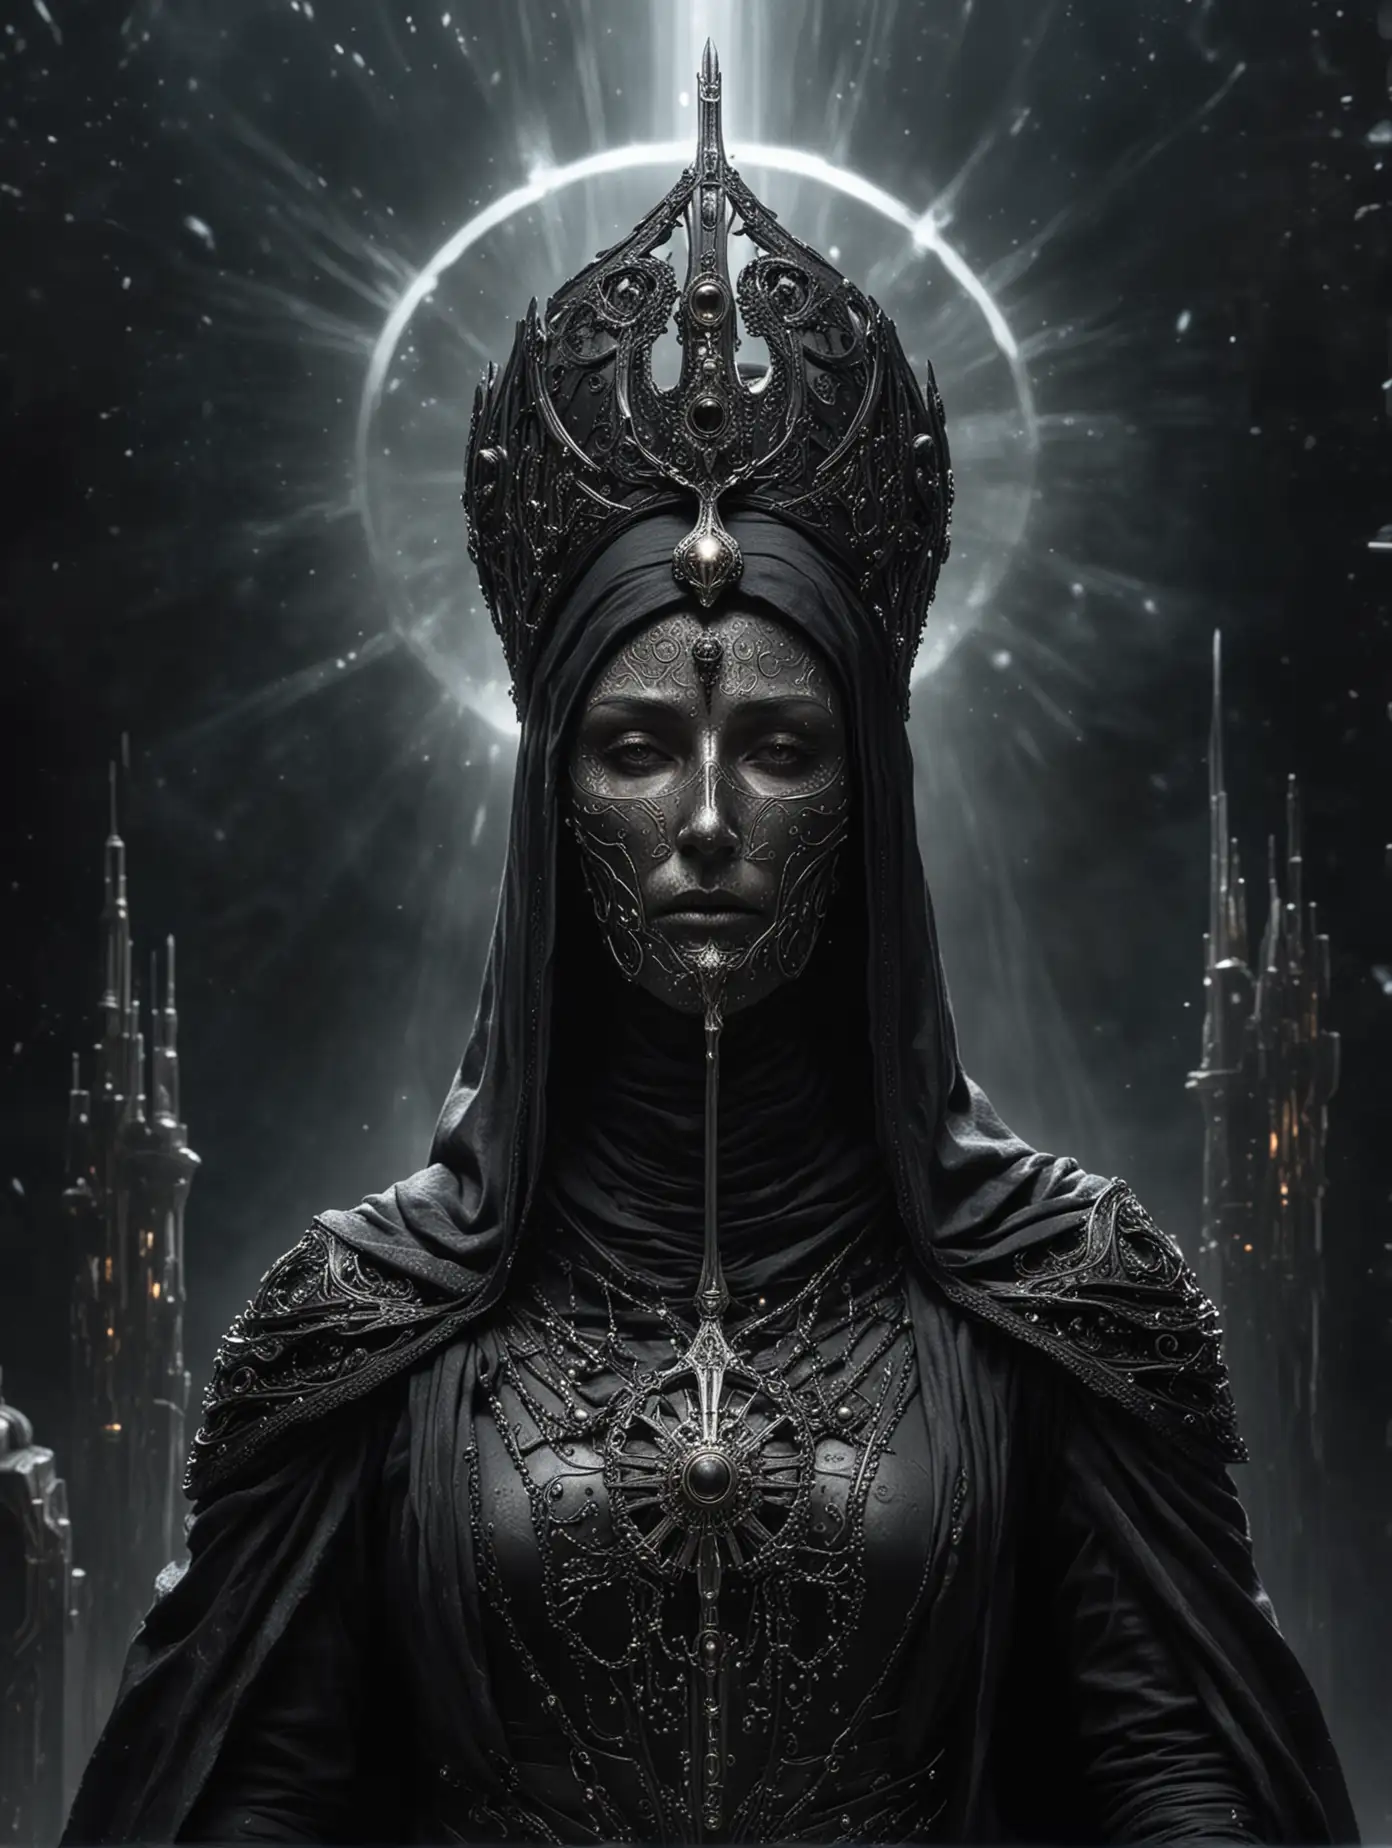 Sister-of-the-Bene-Gesserit-Space-Guardian-with-Halo-Crown-and-Black-Sword